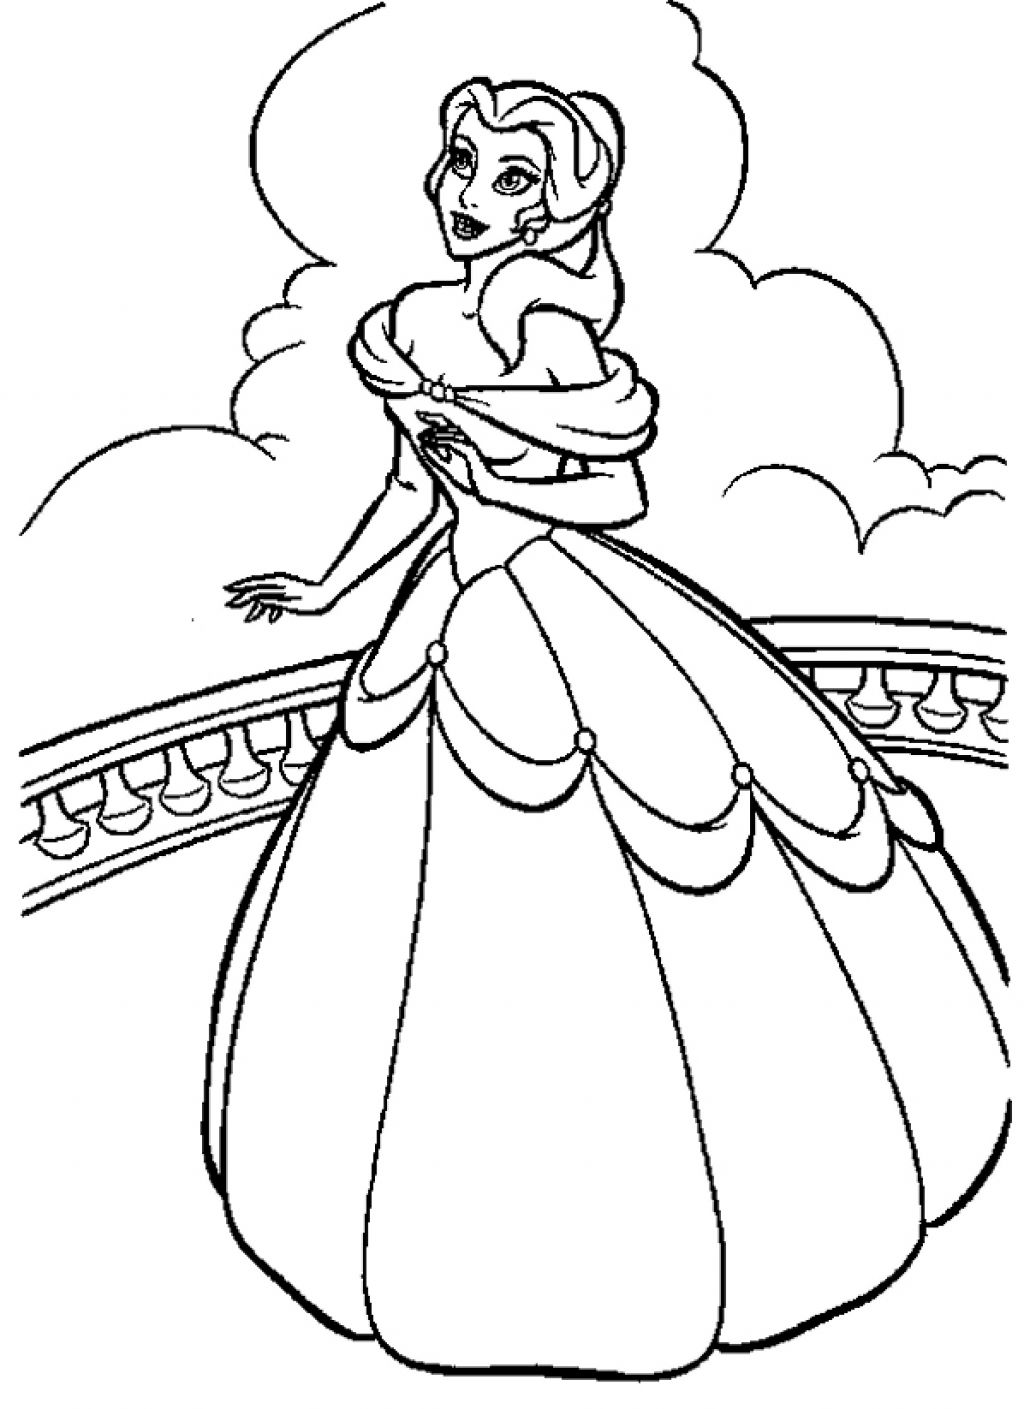 424 Animal Printable Princess Coloring Pages with disney character